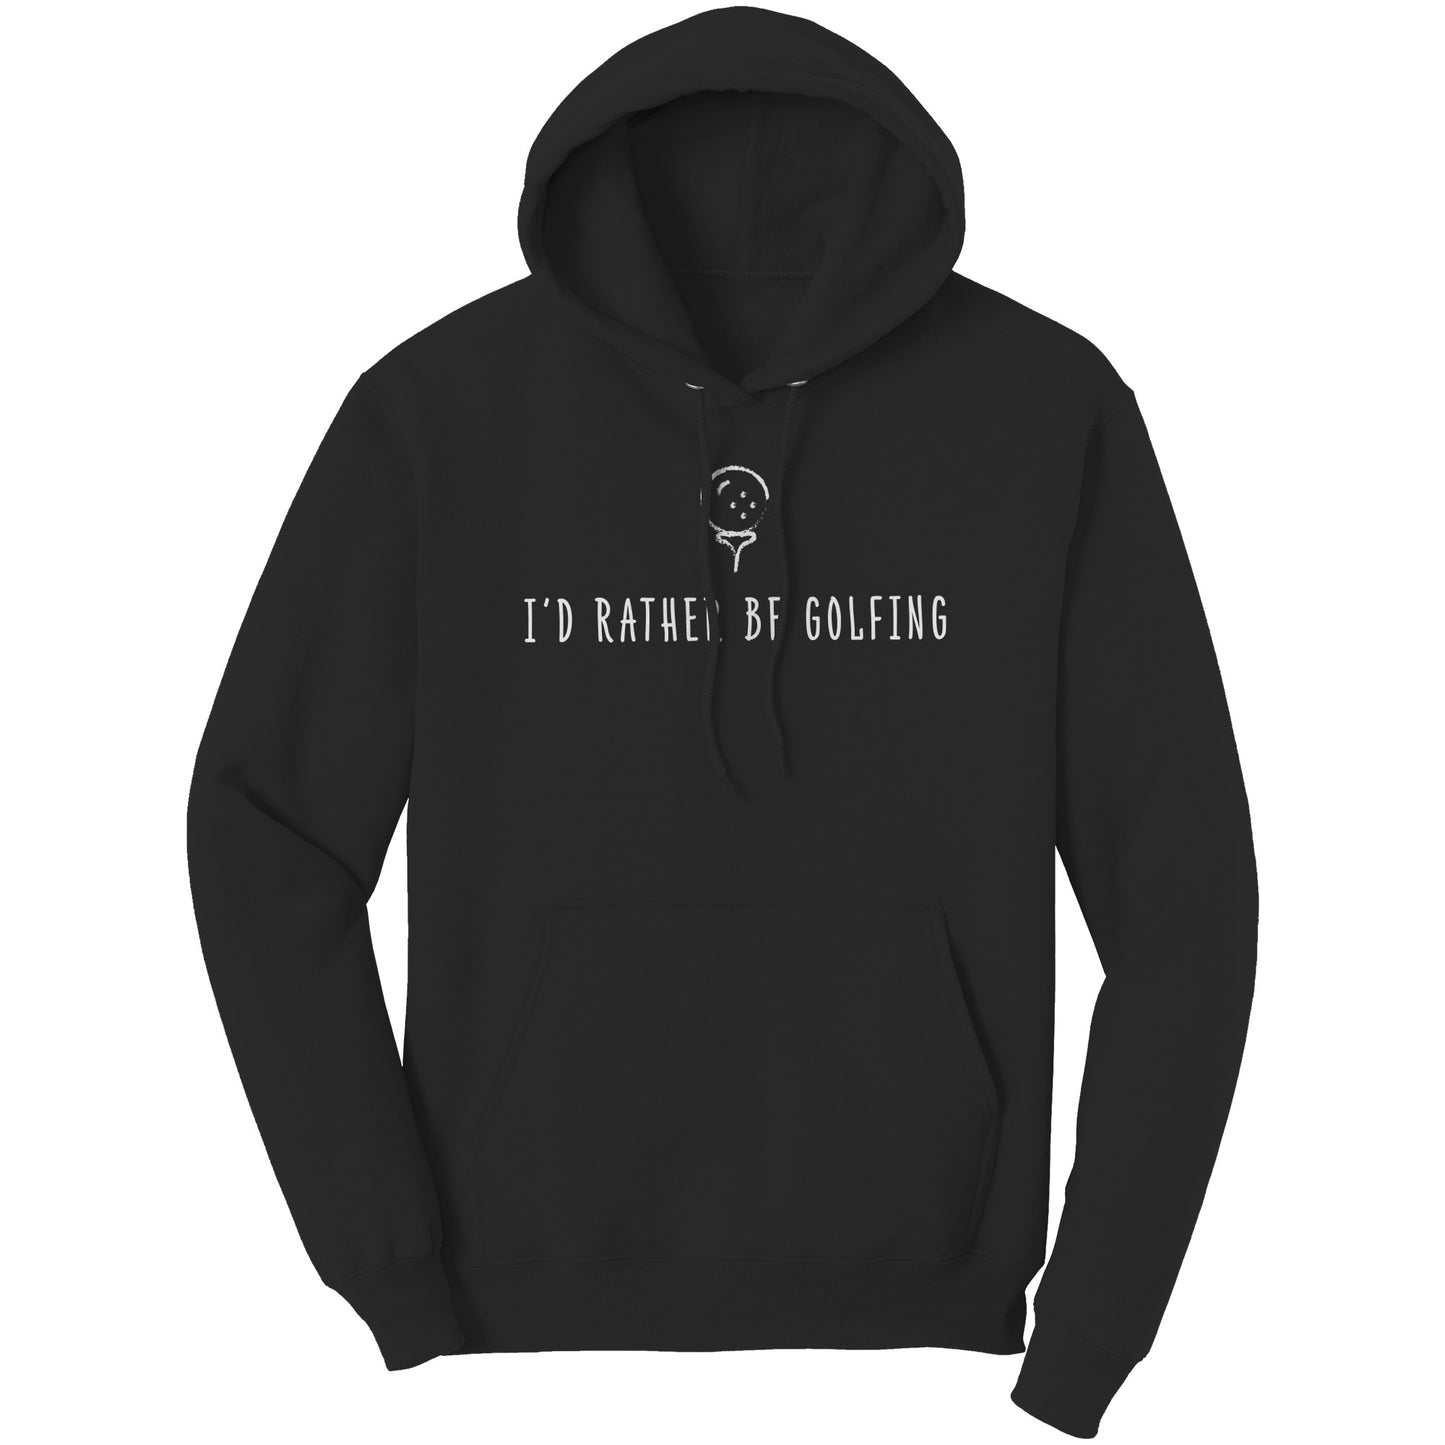 "I'd Rather Be Golfing" Hoodie (White)